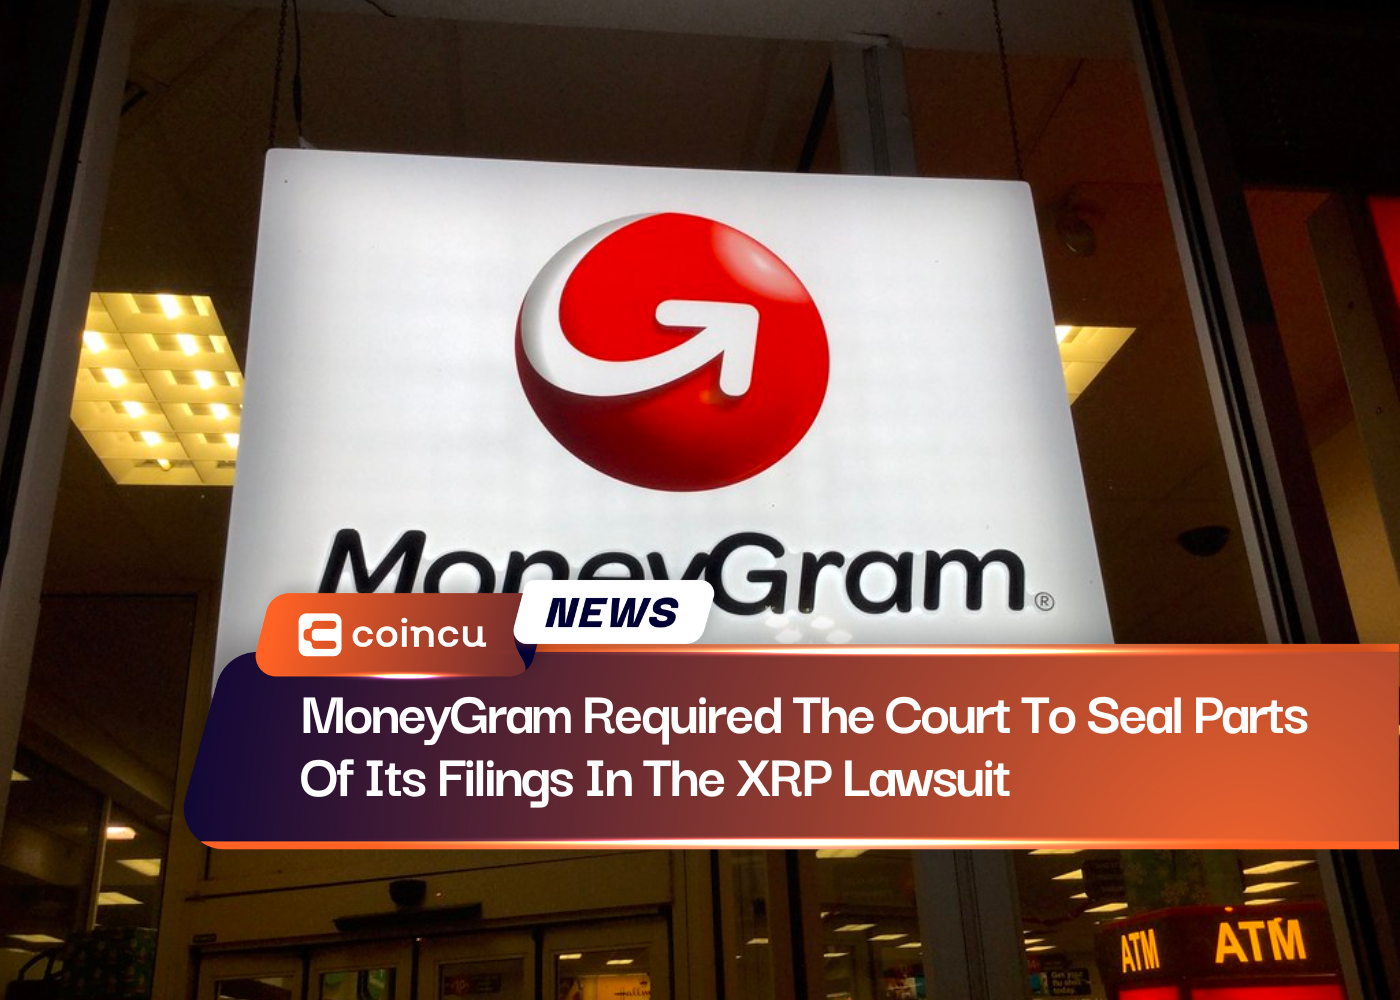 MoneyGram Required The Court To Seal Parts Of Its Filings In The XRP Lawsuit